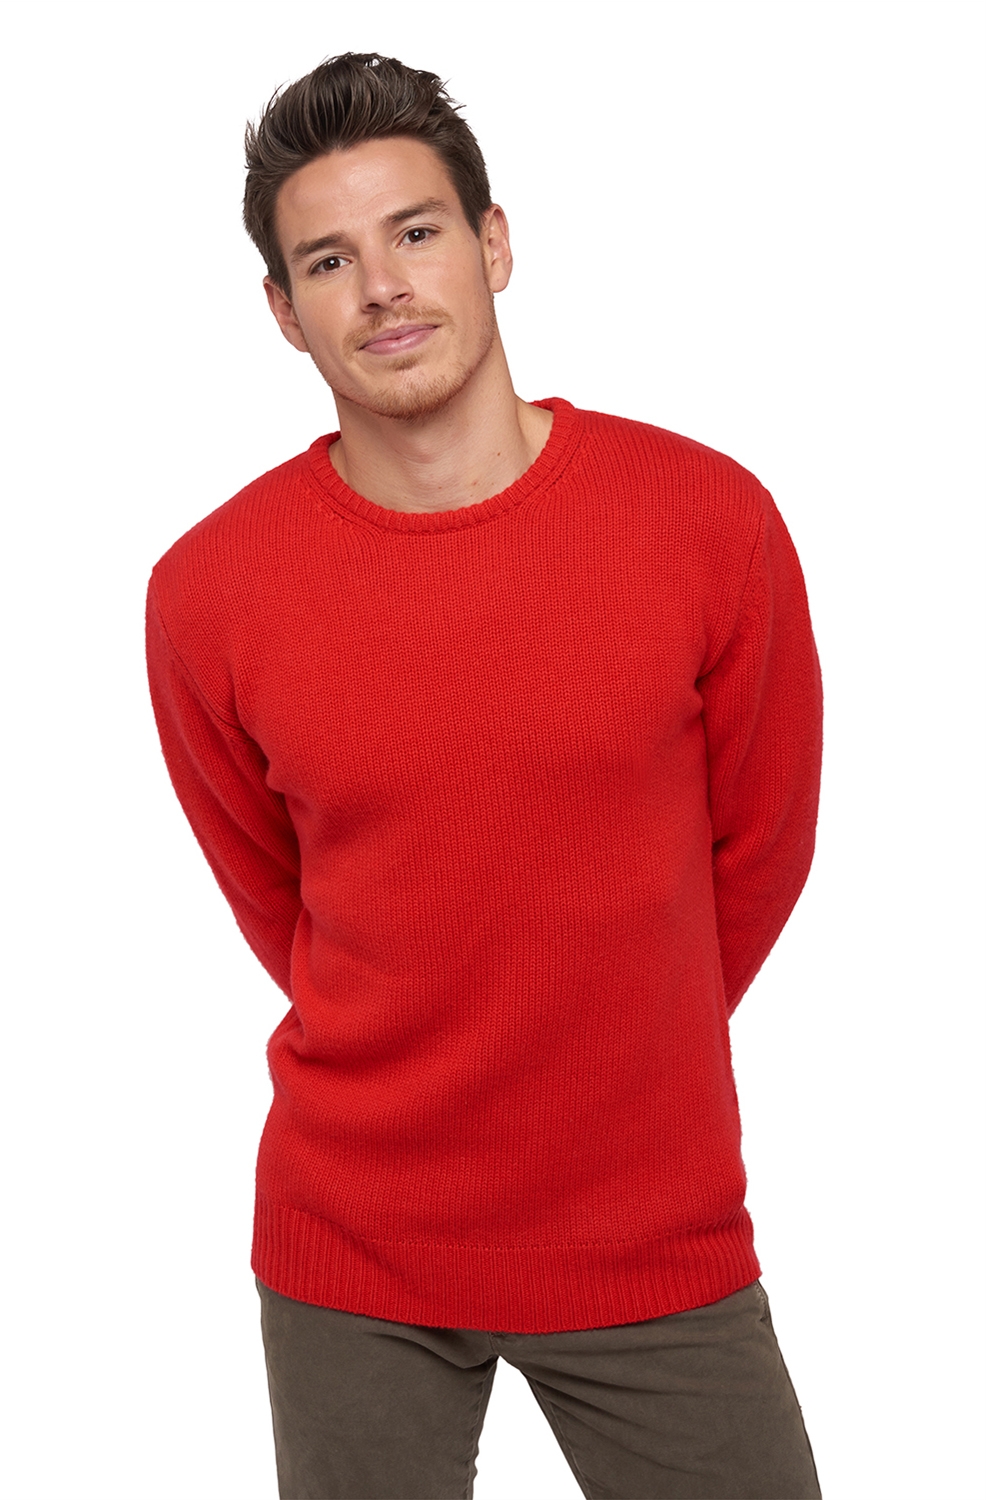 Cachemire pull homme bilal rouge 2xl